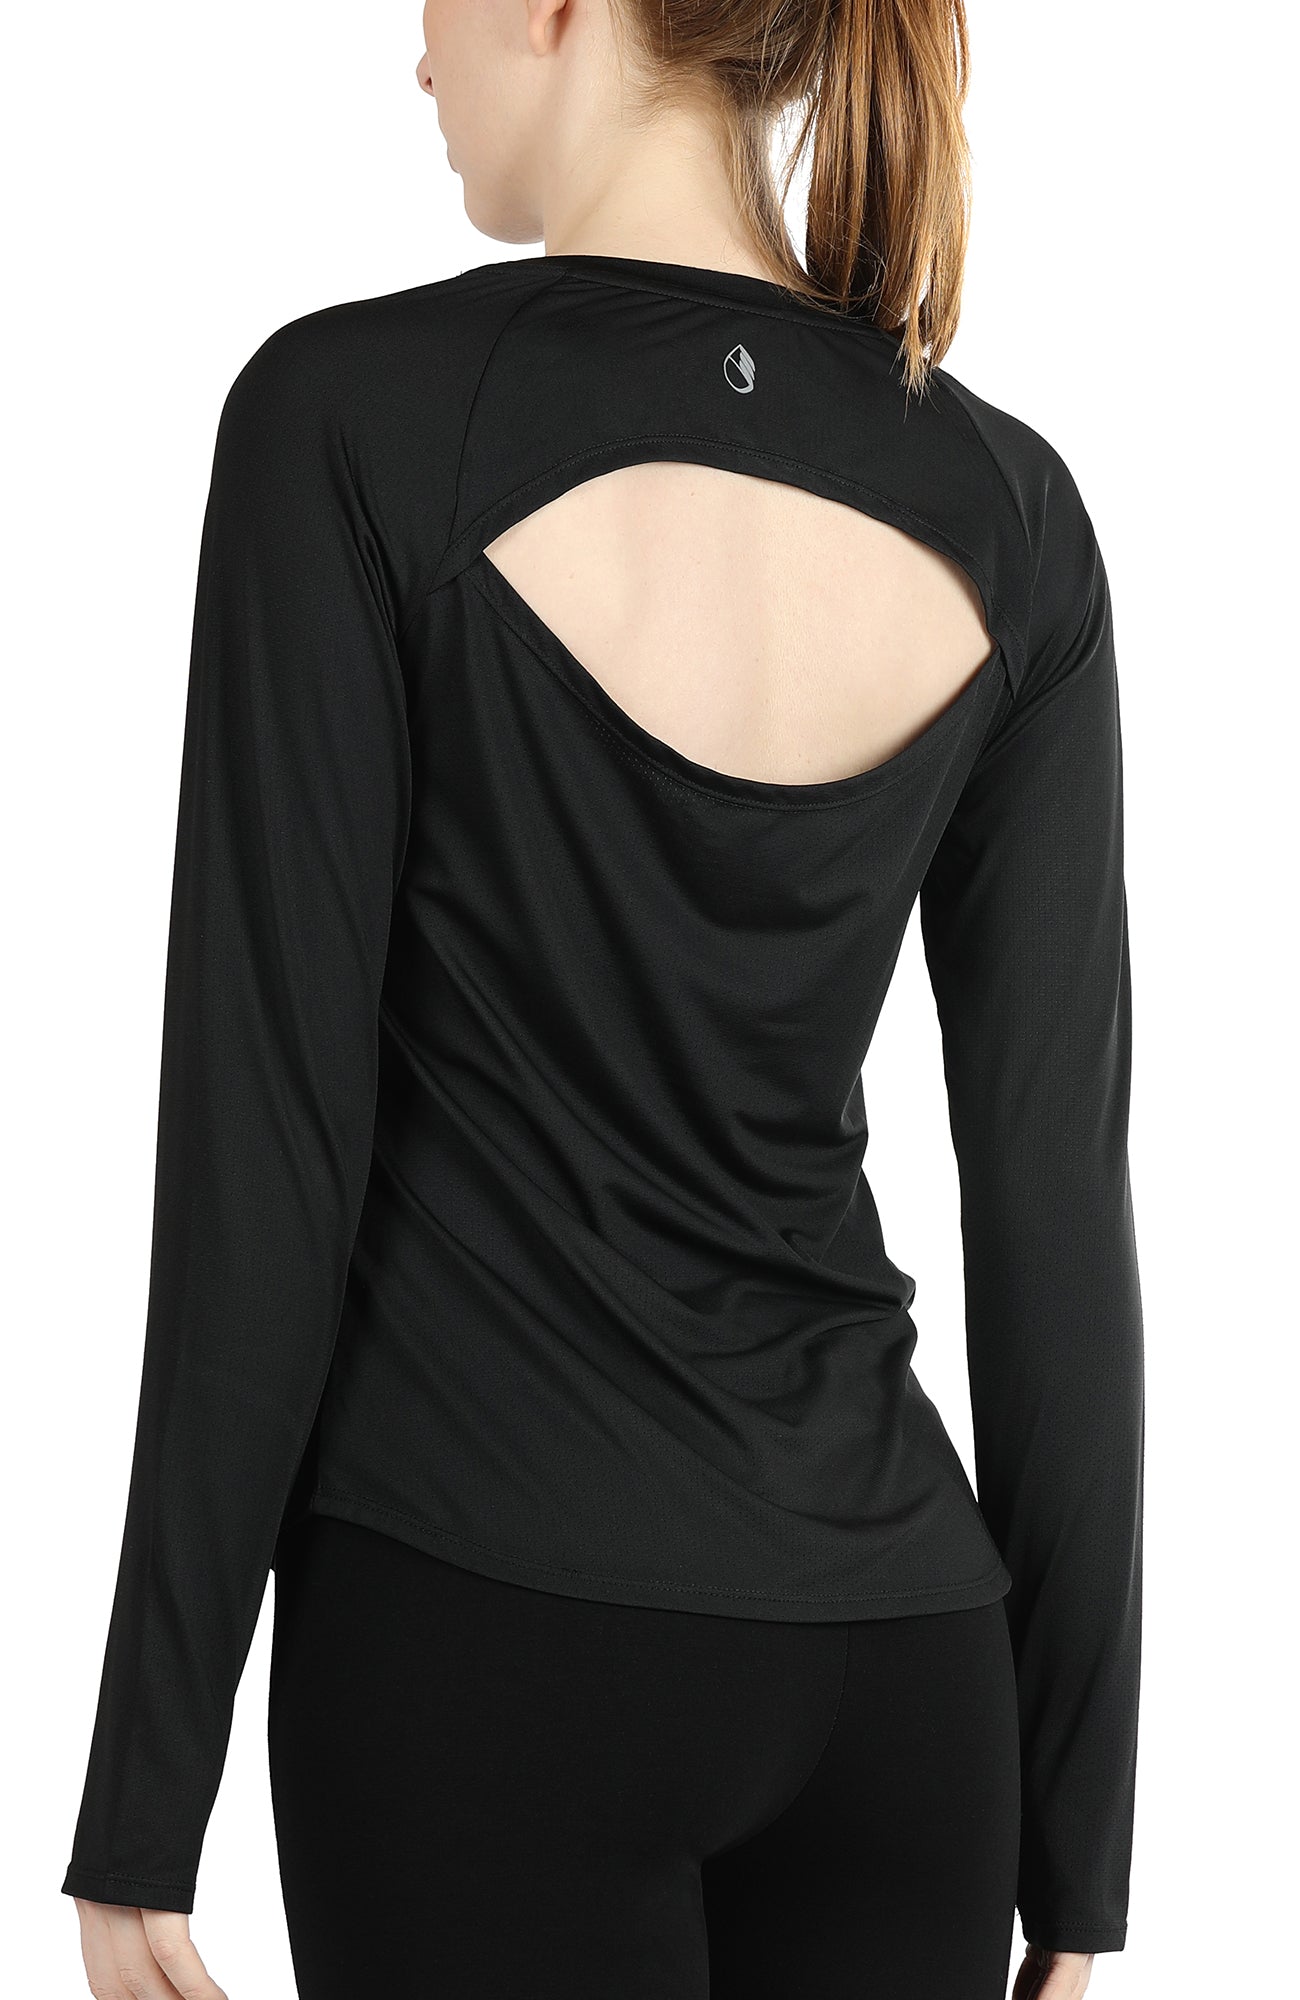 icyzone Long Sleeve Workout Shirts for Women - Open Back Athletic Tops, Running Yoga Shirts with Thumb Holes